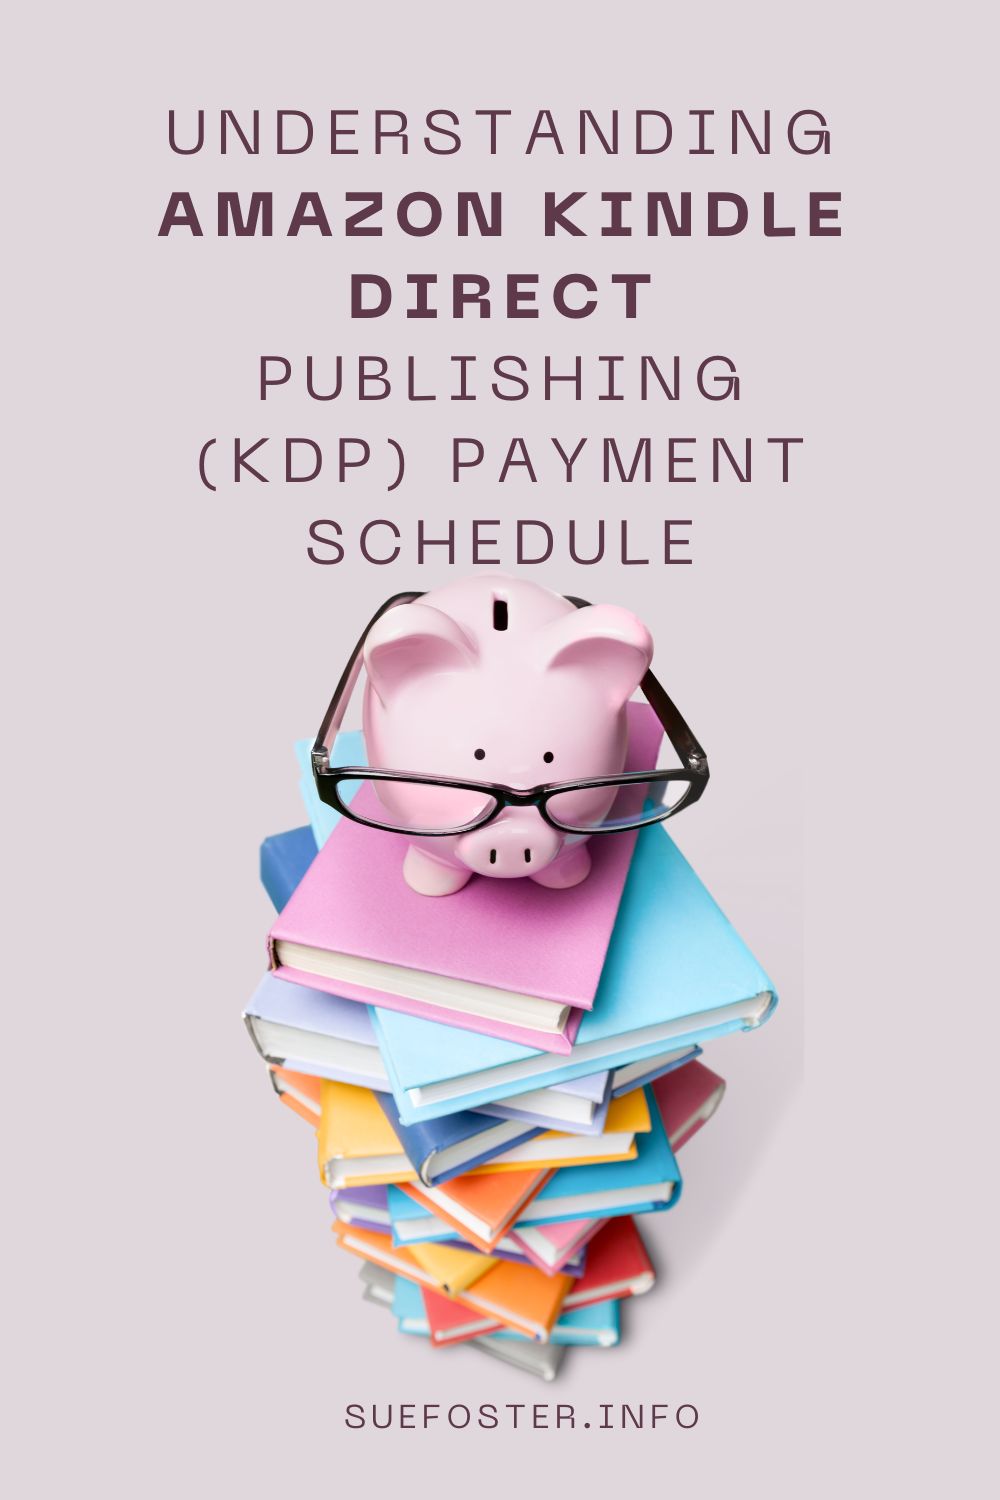 Understanding the KDP payment schedule on Amazon. Find out when and how authors receive payments with KDP.